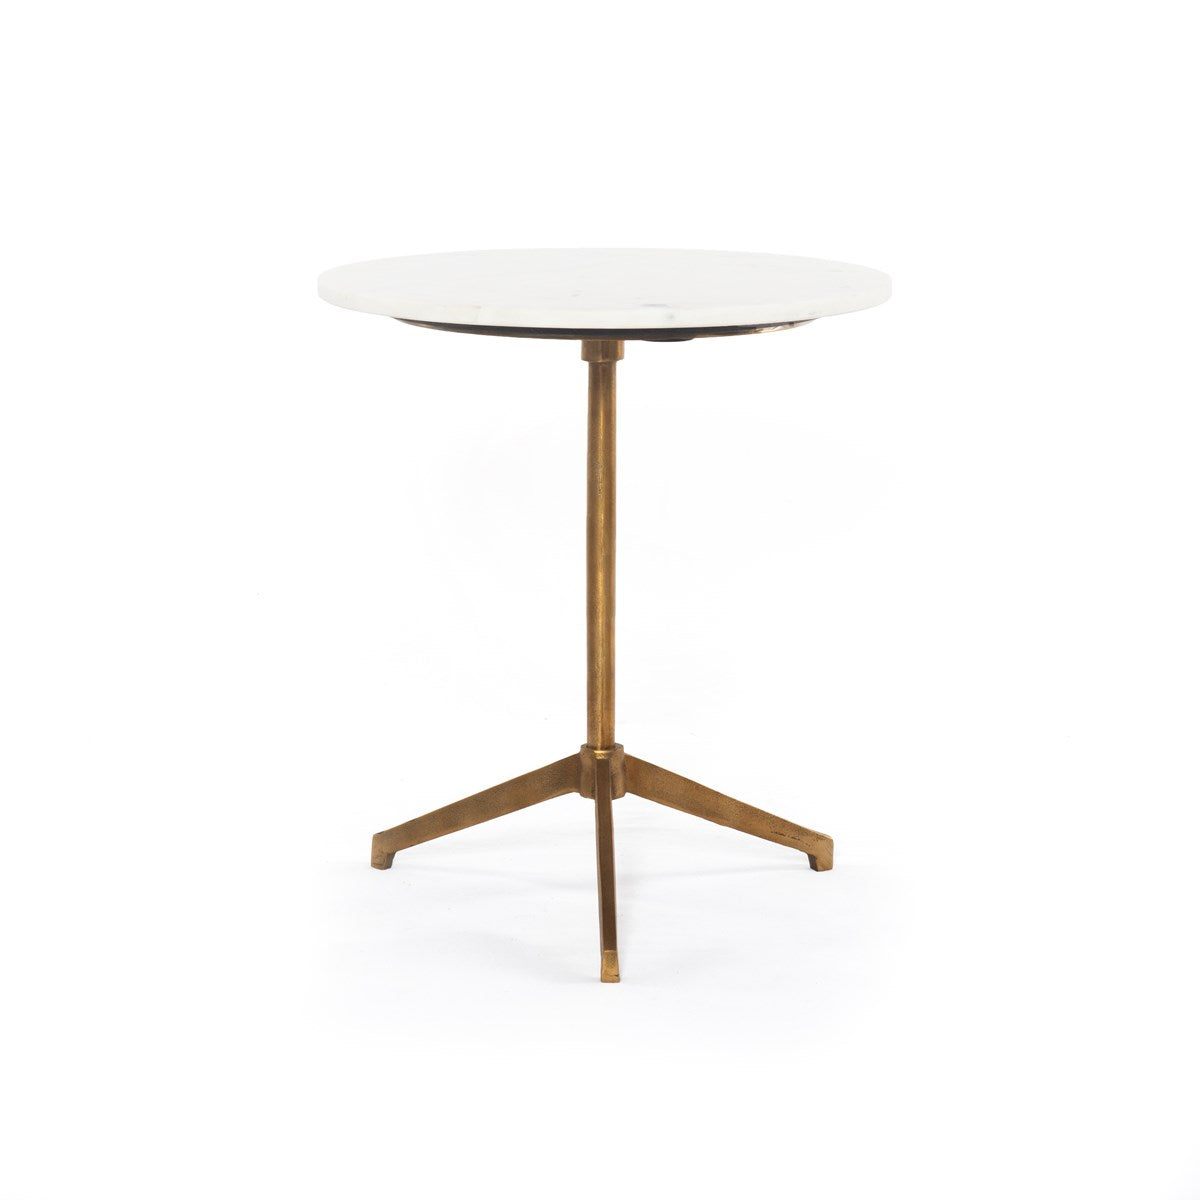 Load image into Gallery viewer, Helen End Table End Table Four Hands     Four Hands, Burke Decor, Mid Century Modern Furniture, Old Bones Furniture Company, Old Bones Co, Modern Mid Century, Designer Furniture, https://www.oldbonesco.com/
